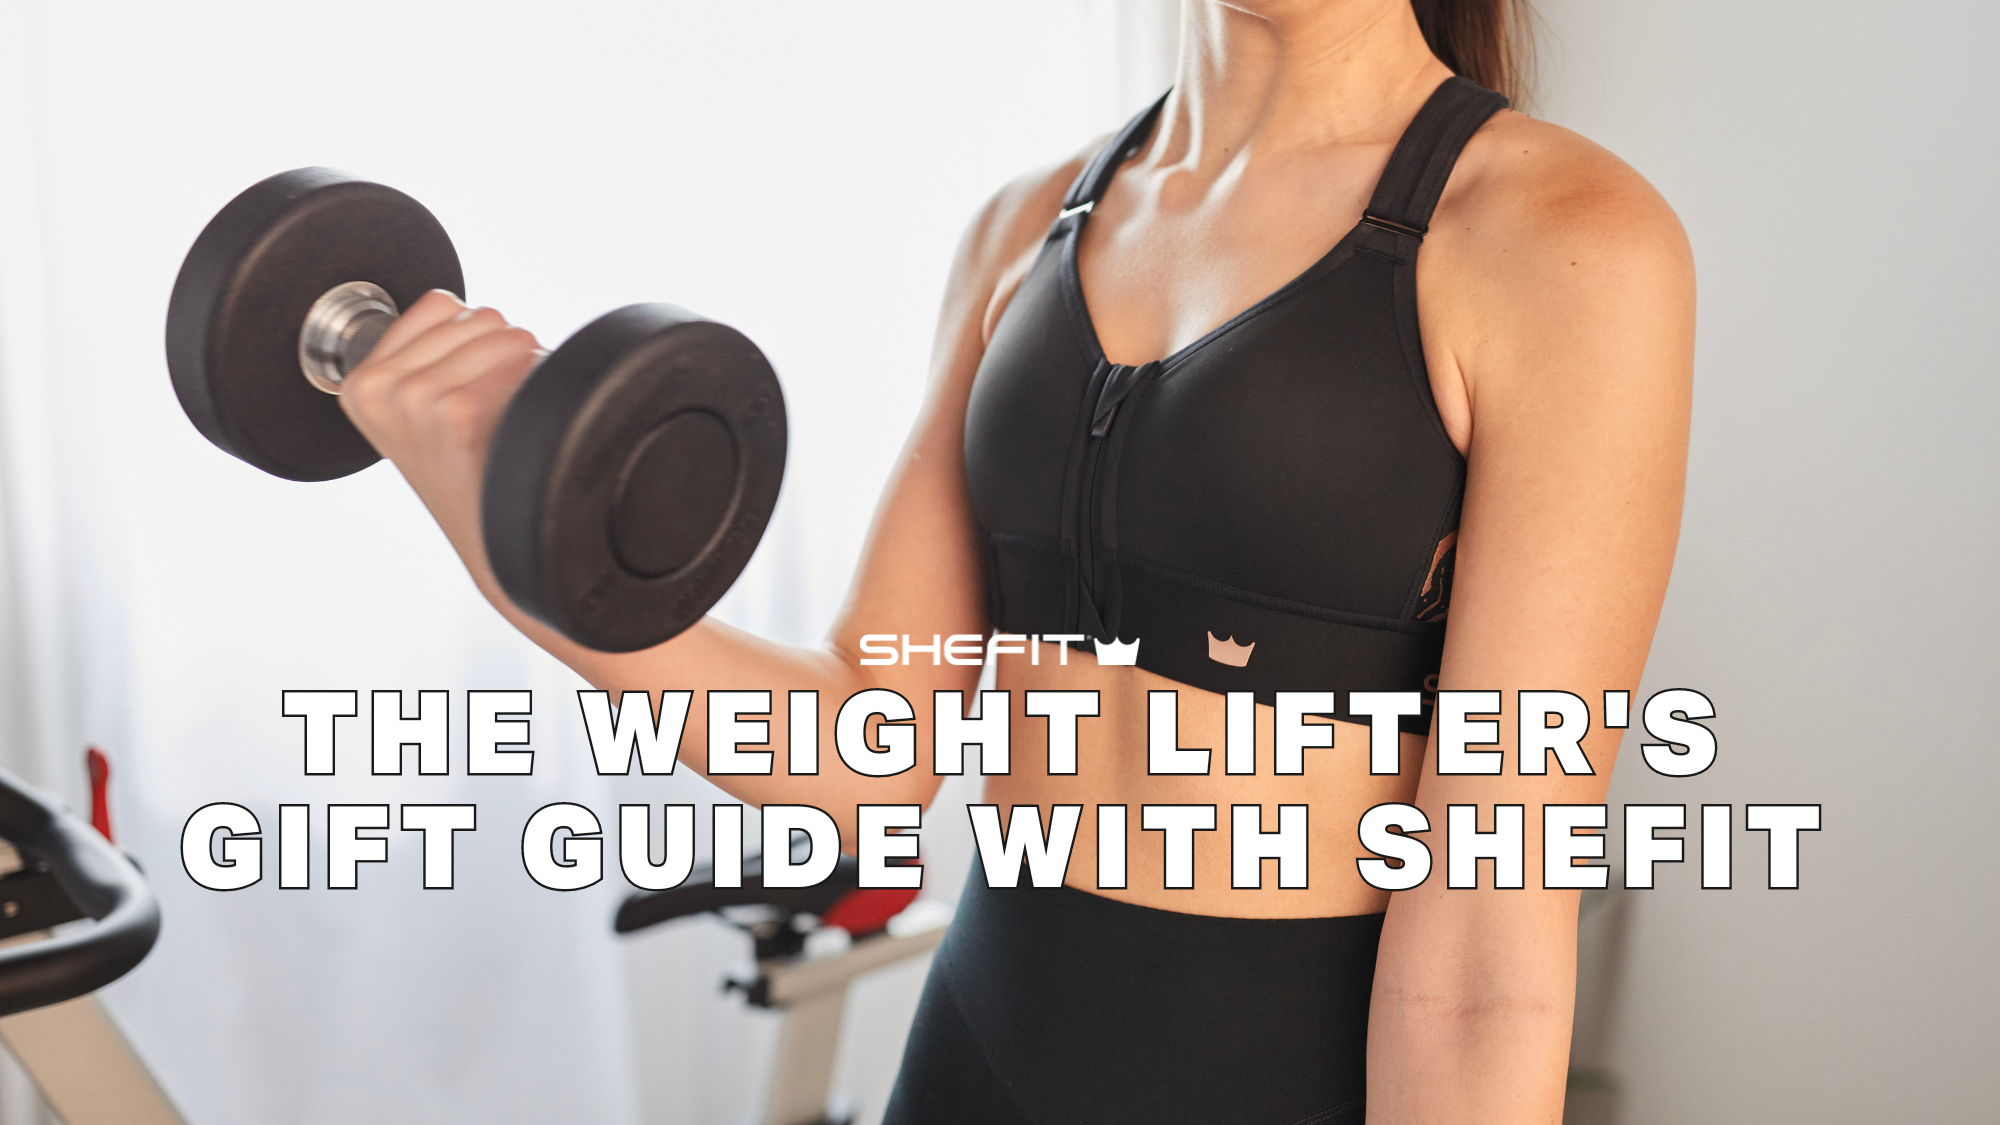 SHEFIT Weight Lifters Gift Guide